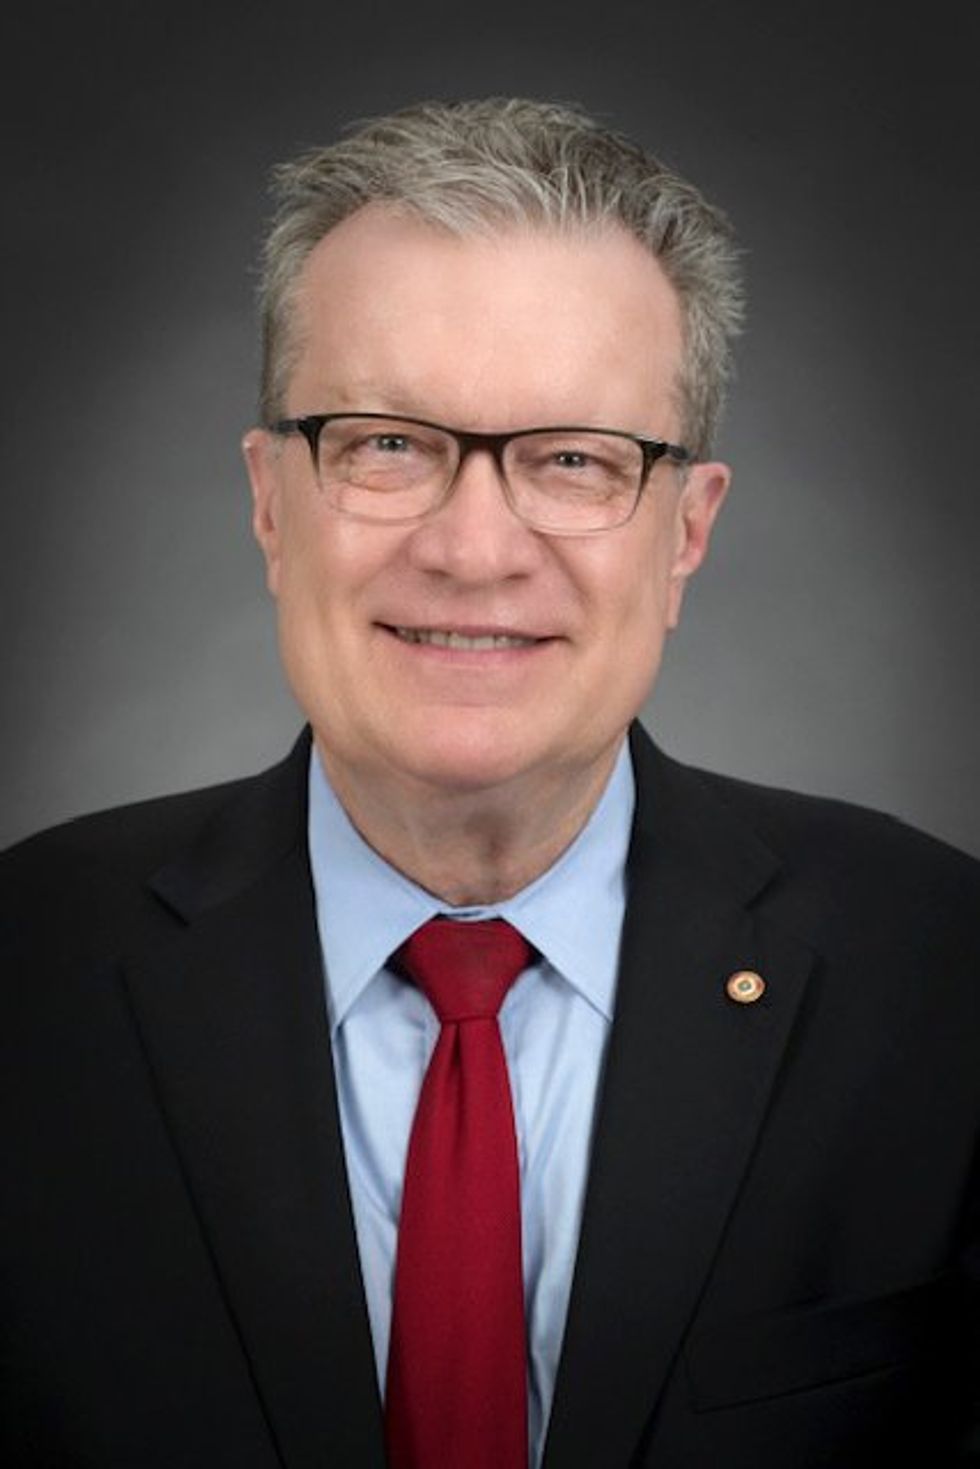 man with glasses wearing a red tie, blue shirt and black blazer in front of a gray background